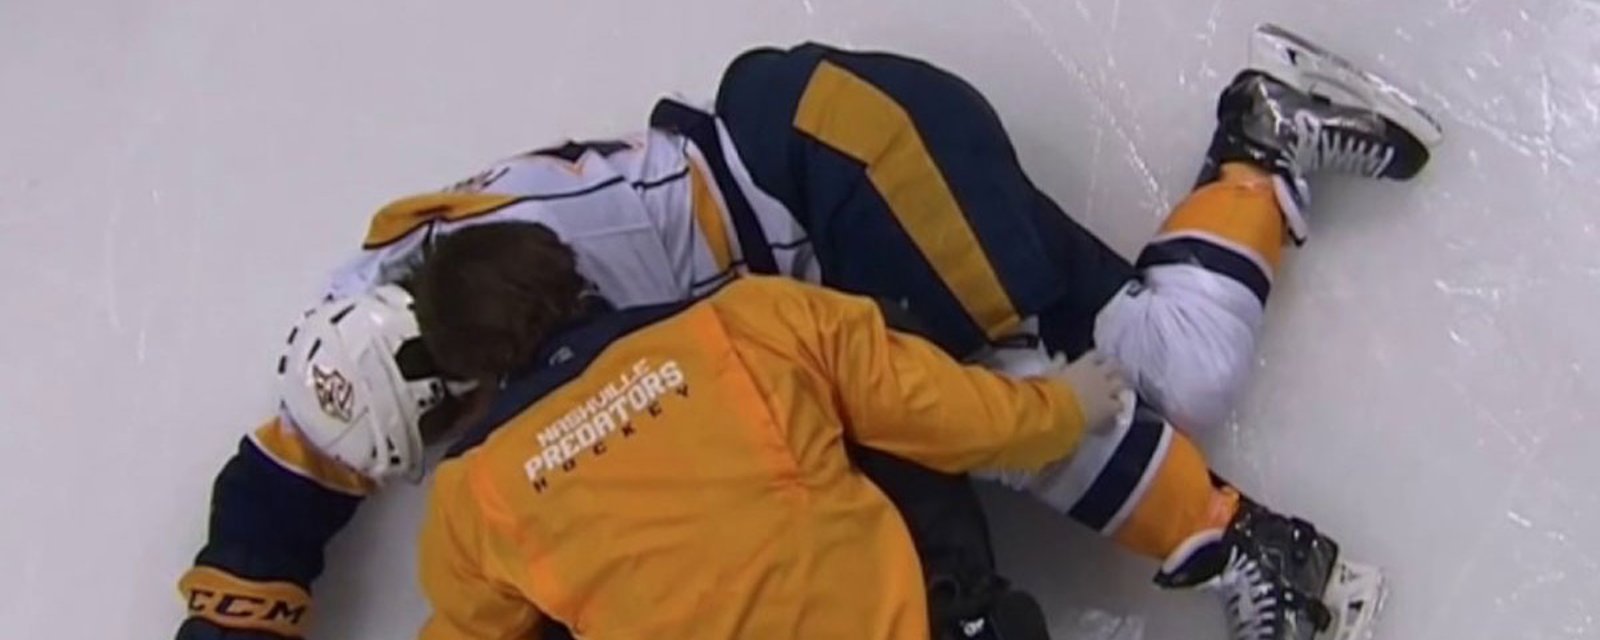 Must see: New update on Kevin Fiala after SCARY injury